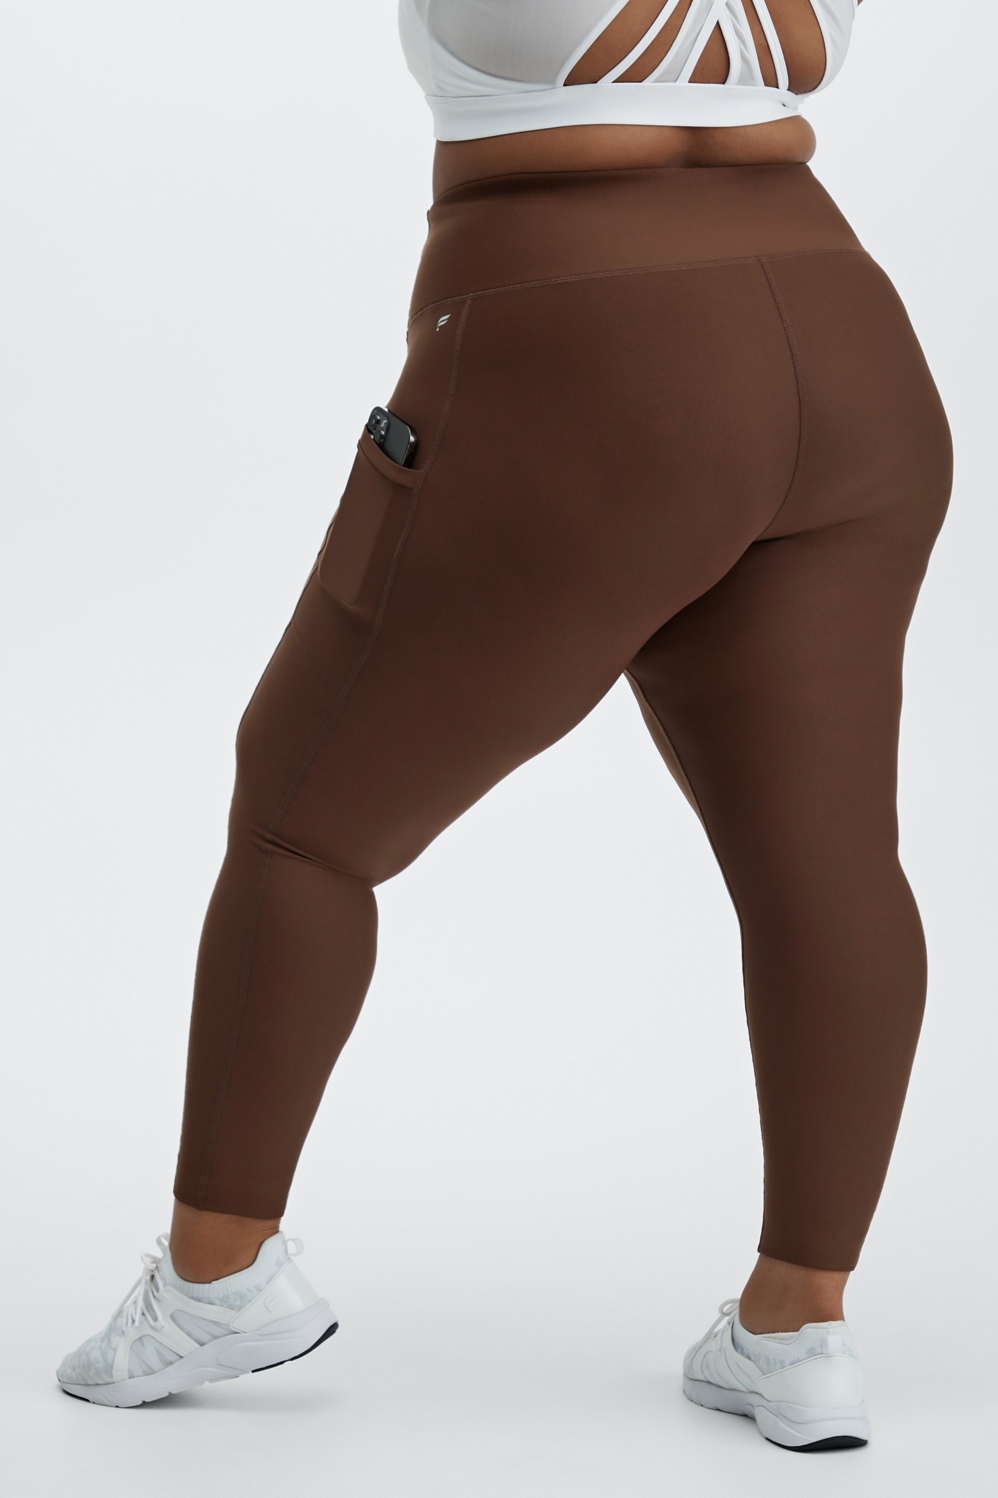 HSMQHJWE Brown Workout Leggings Girls Leggings With Pockets Autumn Winter  Warm Lined Thick Trousers High Waist Winter Thick Opaque Leggings Squat